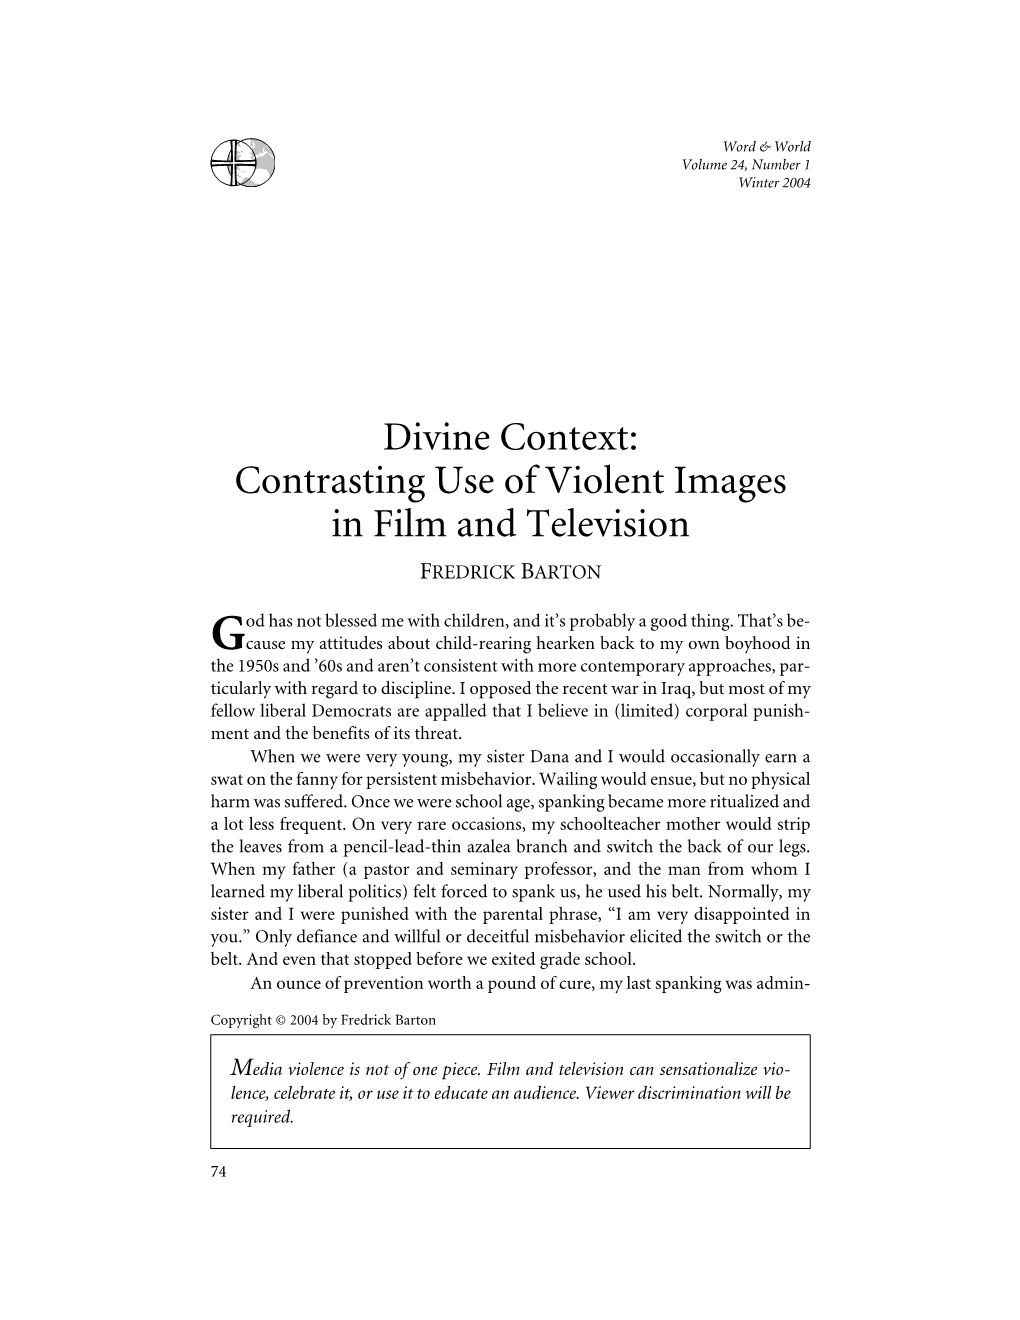 Contrasting Use of Violent Images in Film and Television FREDRICK BARTON